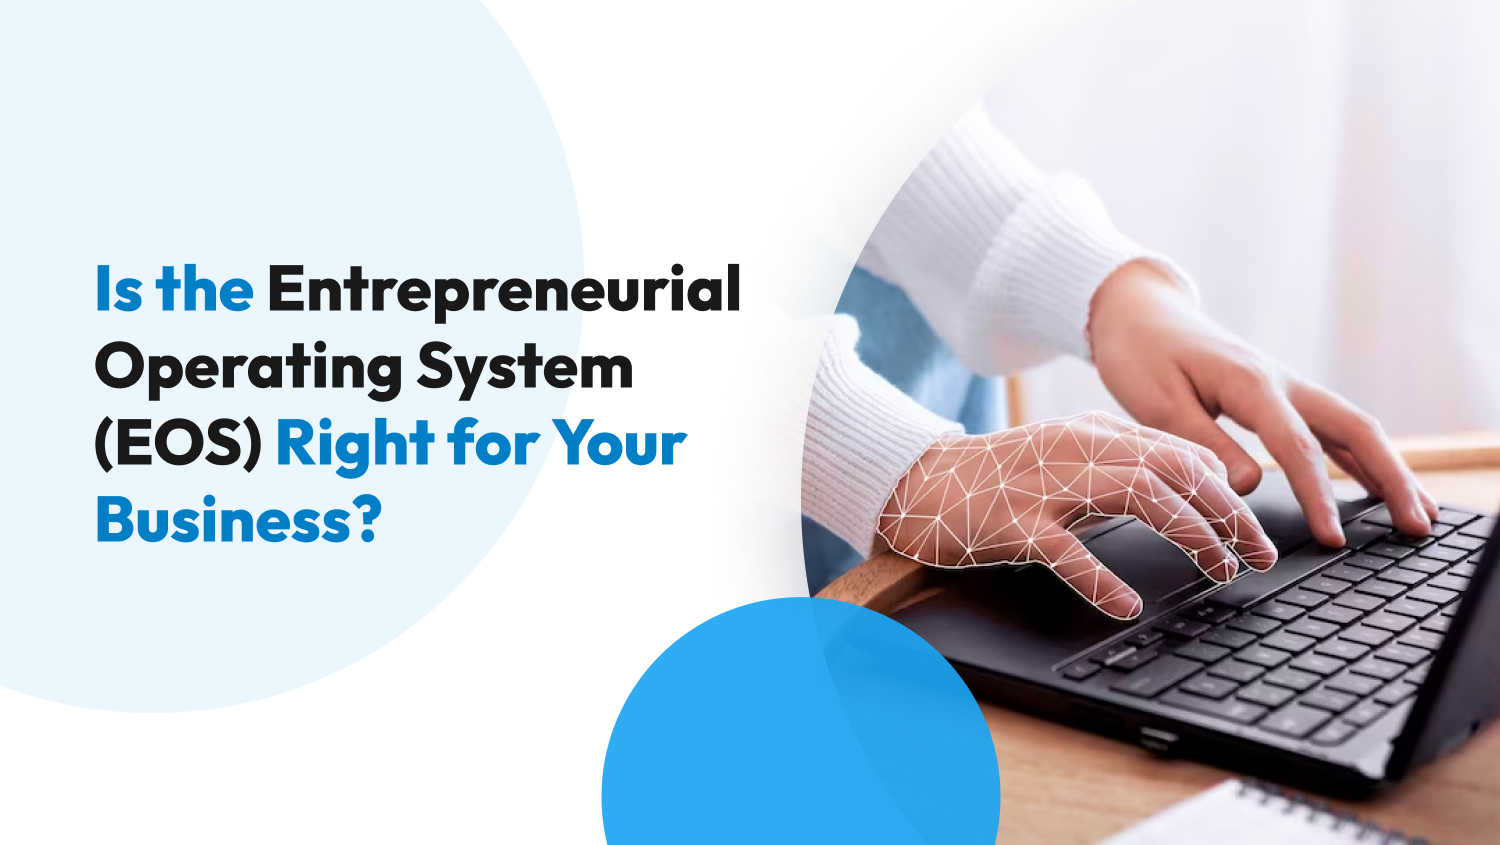 Is the Entrepreneurial Operating System (EOS) Right for Your Business?